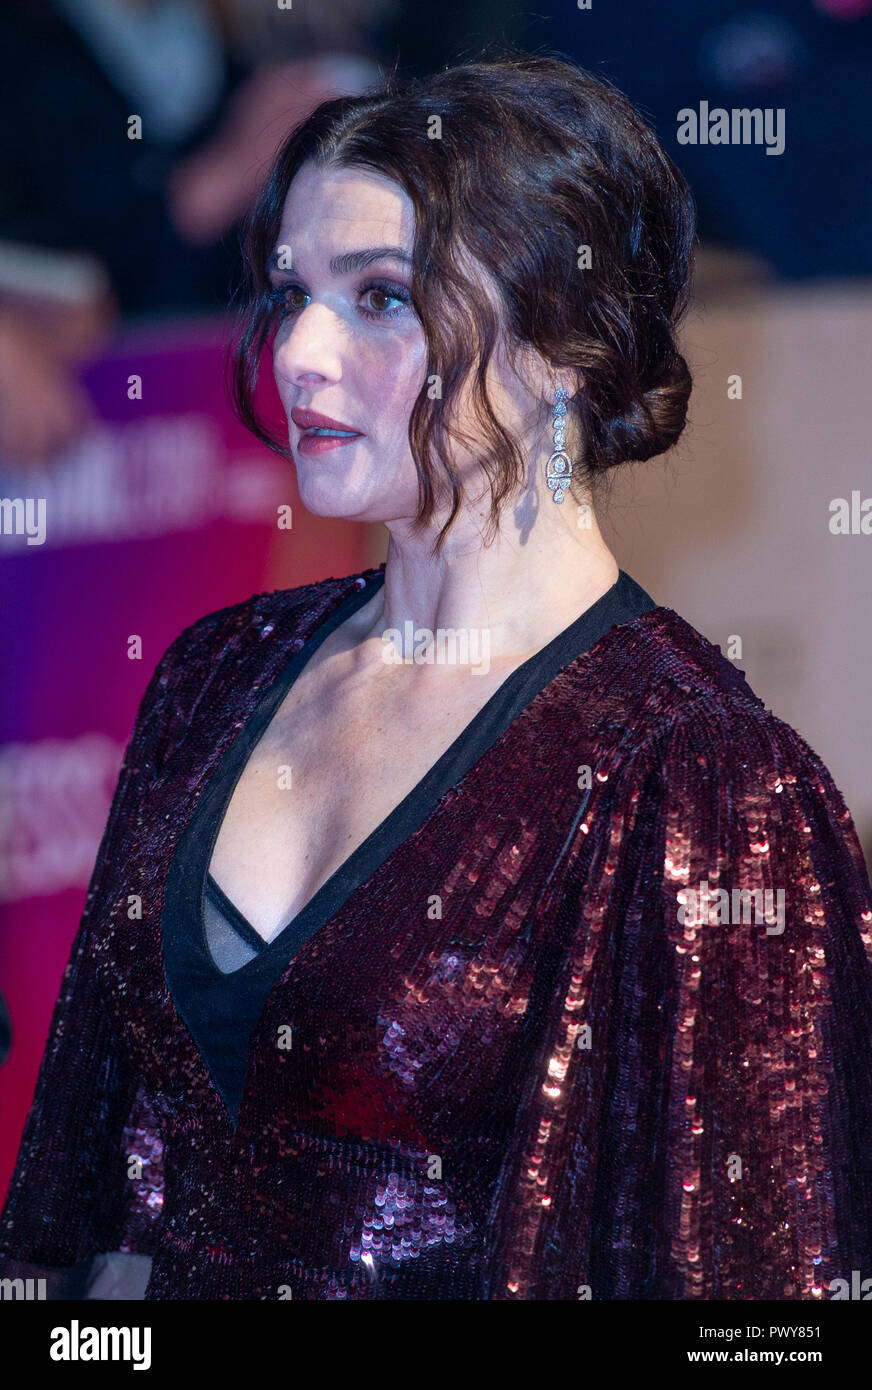 London, UK. 18th October, 2018. Rachel Weisz attends the UK Premiere of 'The Favourite' & American Express Gala at the 62nd BFI London Film Festival on October 18, 2018 in London, England. Credit: Gary Mitchell, GMP Media/Alamy Live News Stock Photo